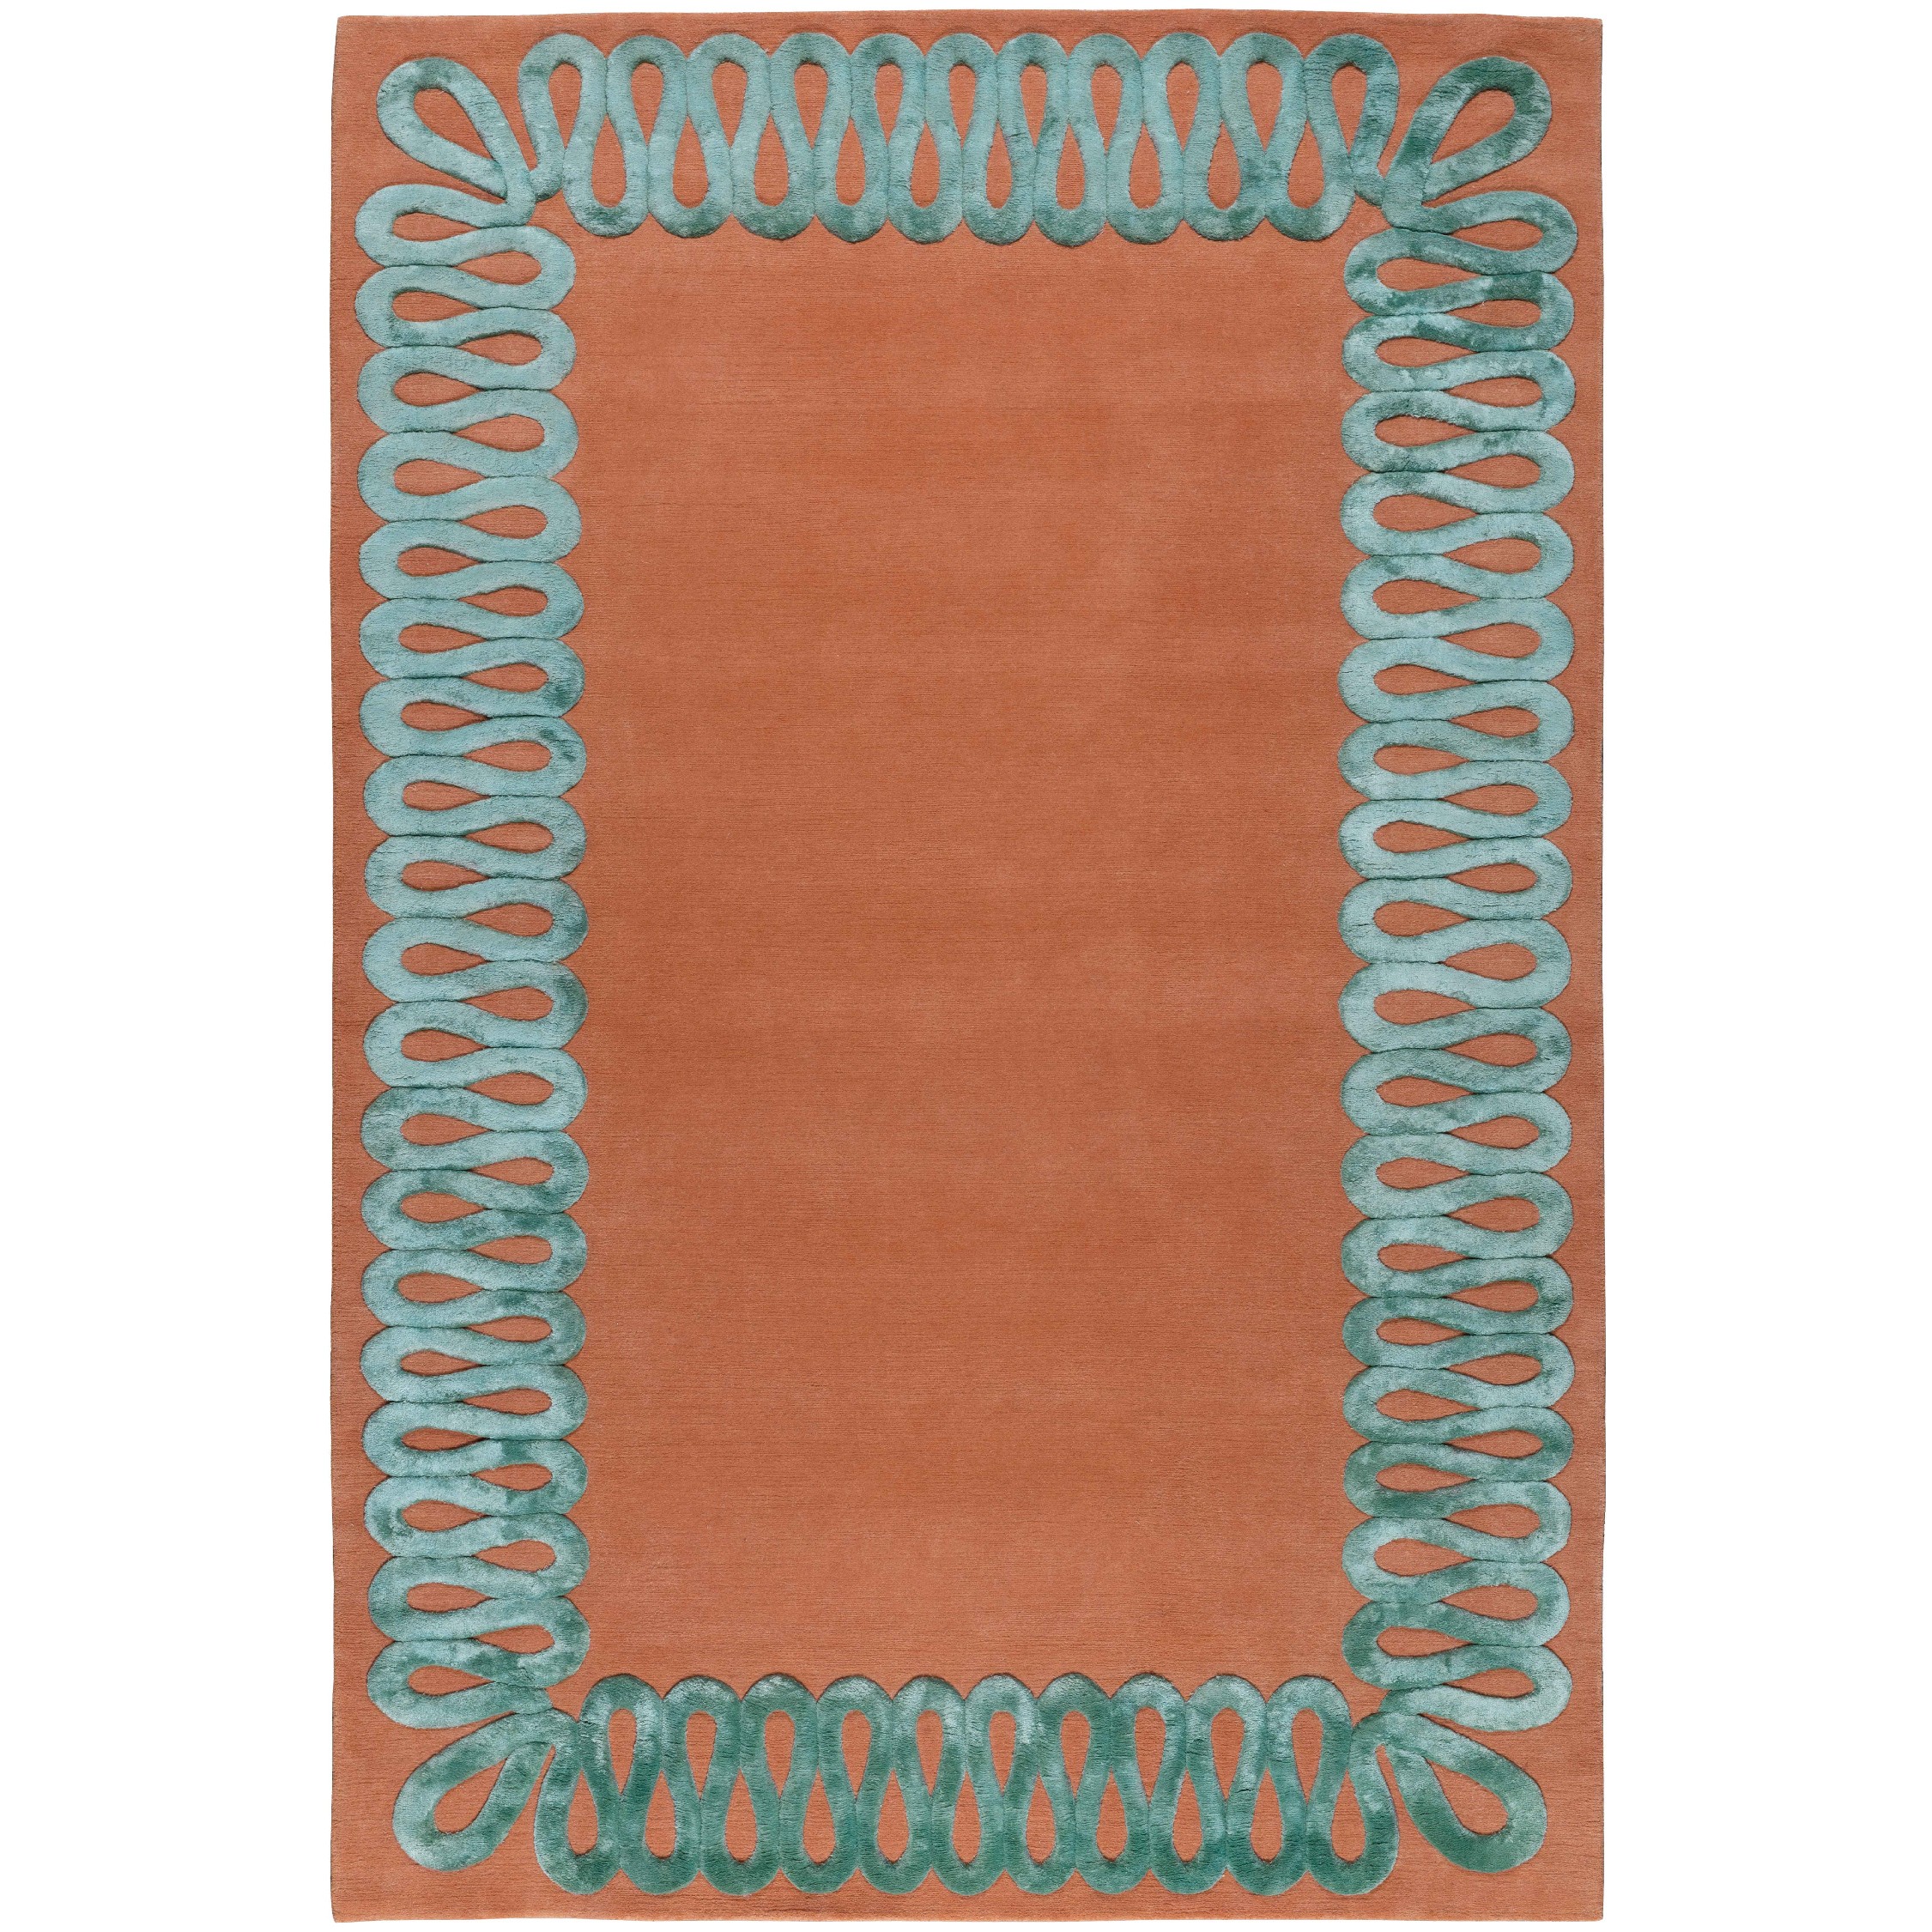 The image of an Ruffle Sage Rug product